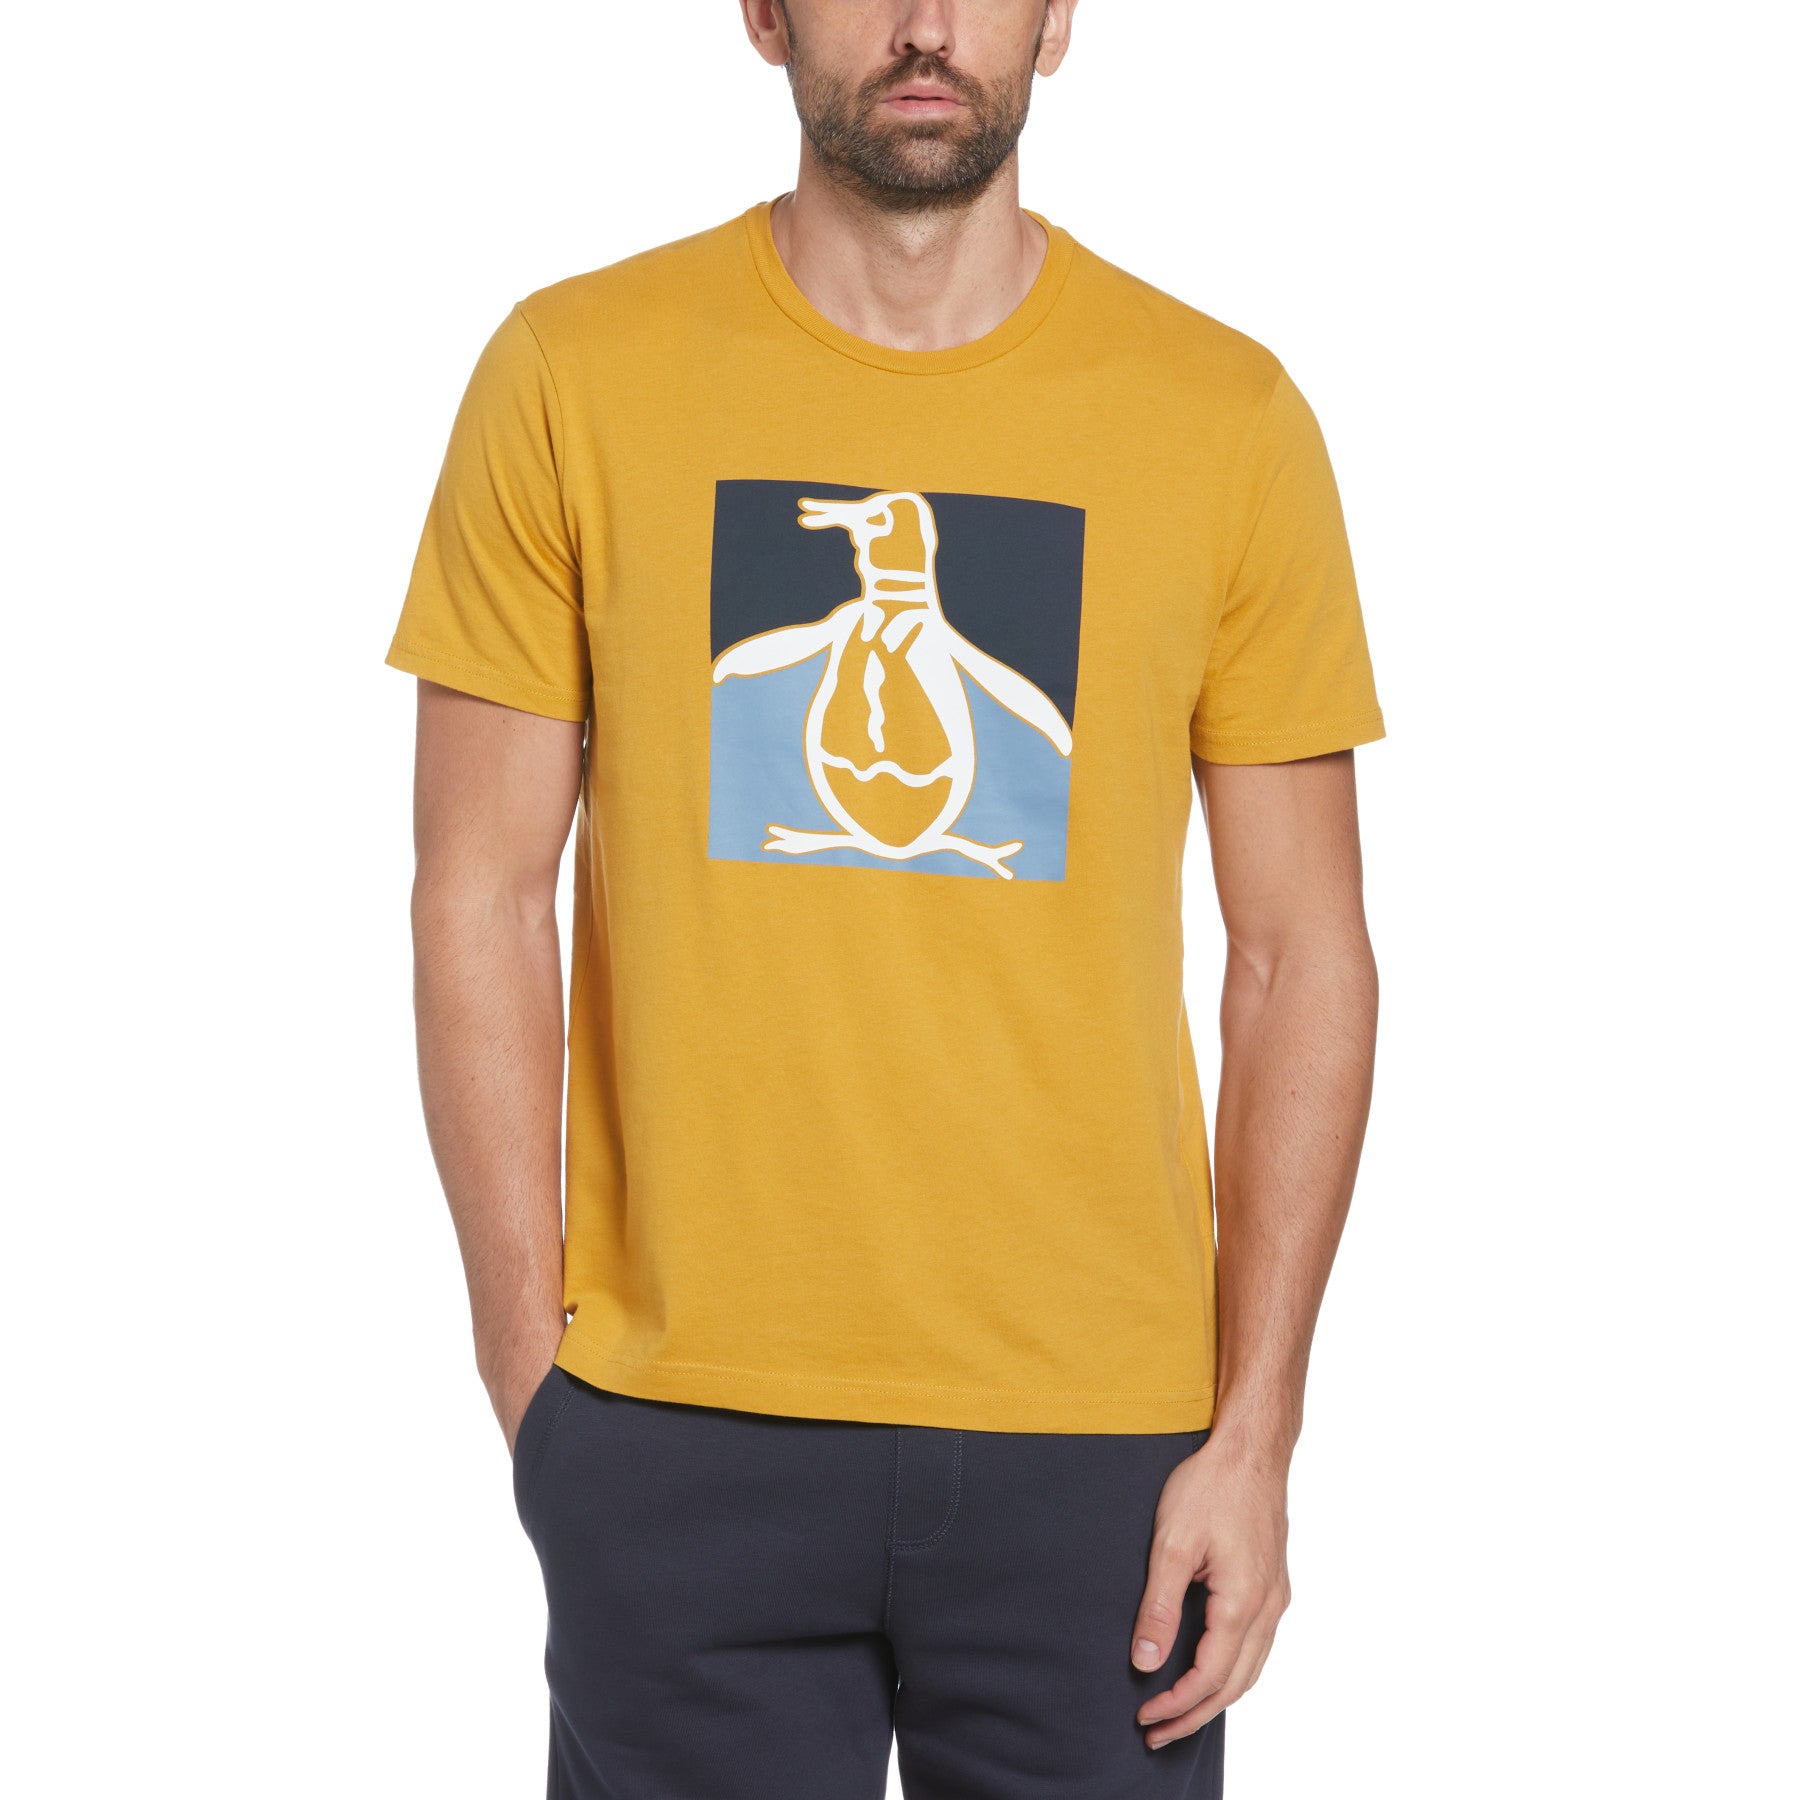 View Knit Graphic Pete TShirt In Harvest Gold information